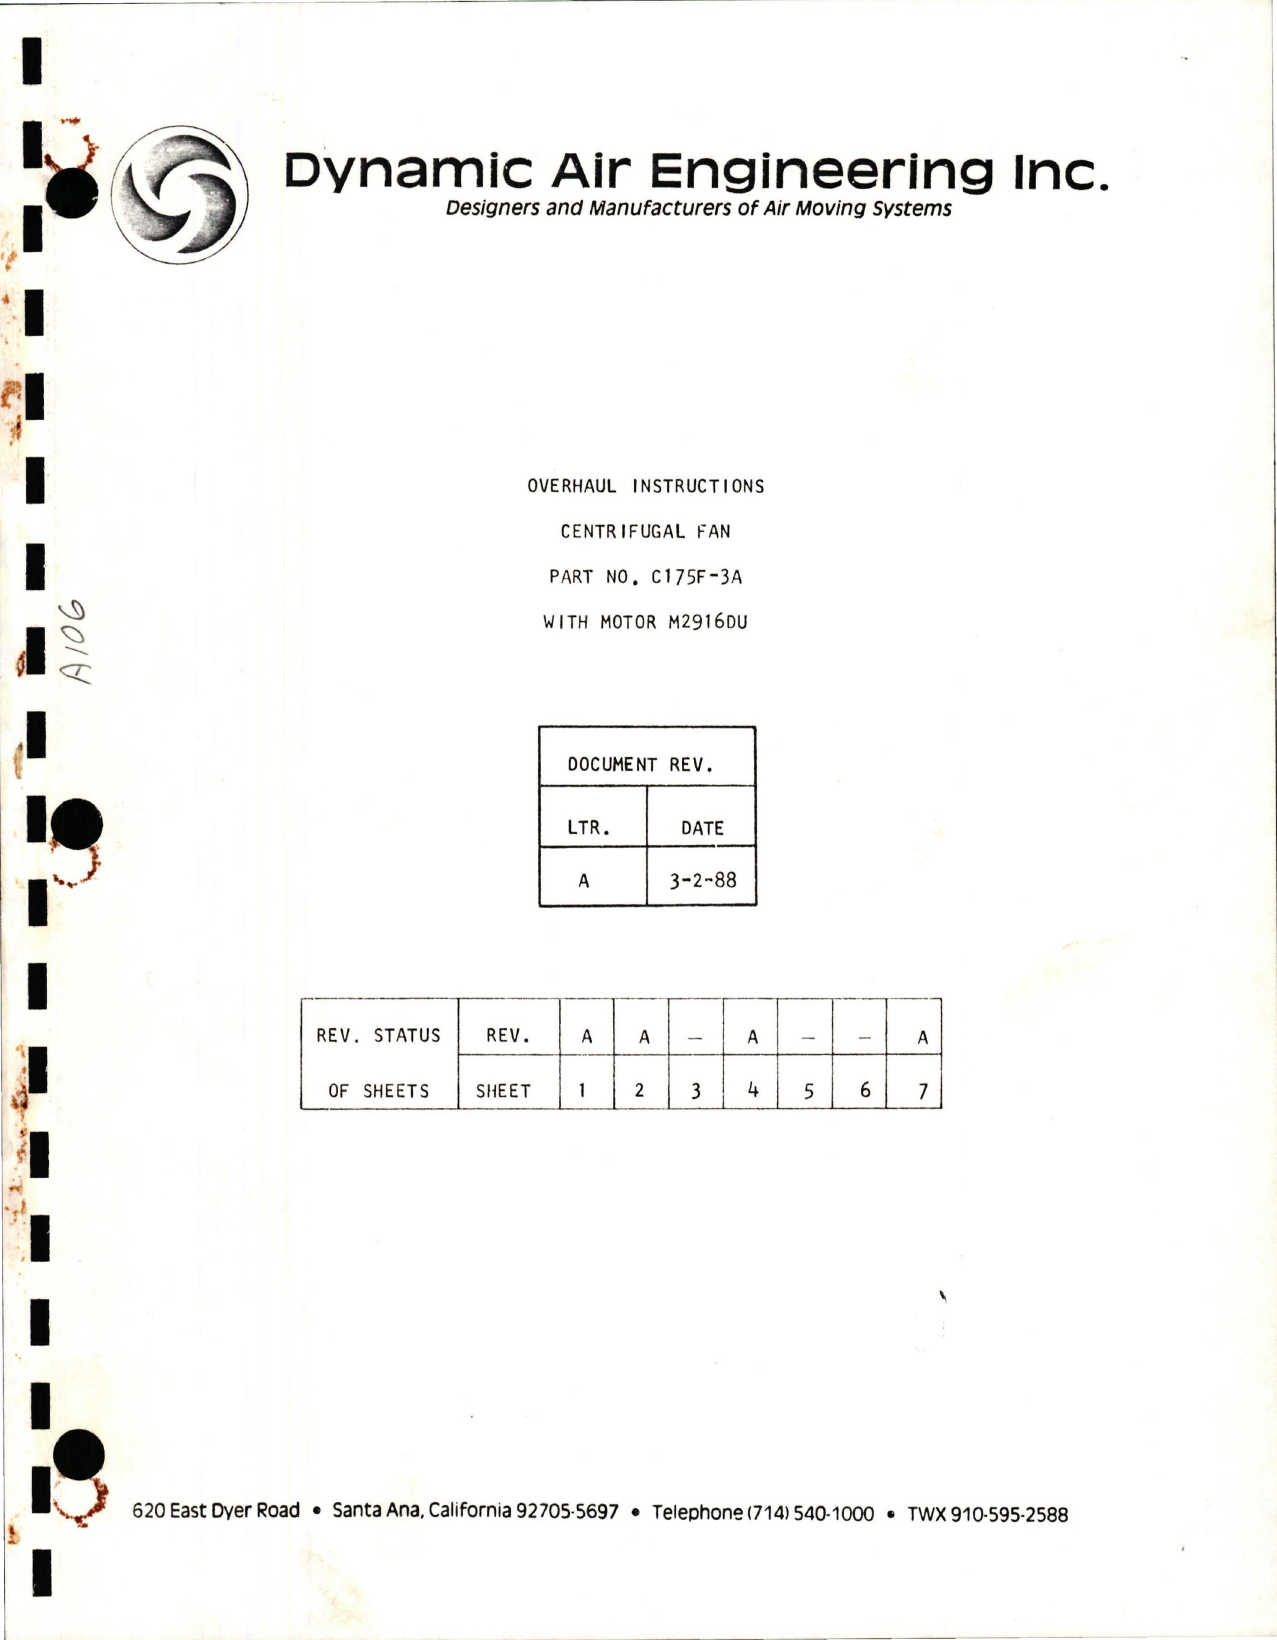 Sample page 1 from AirCorps Library document: Overhaul Instructions for Centrifugal Fan - Part C175F-3A - with Motor M2916DU